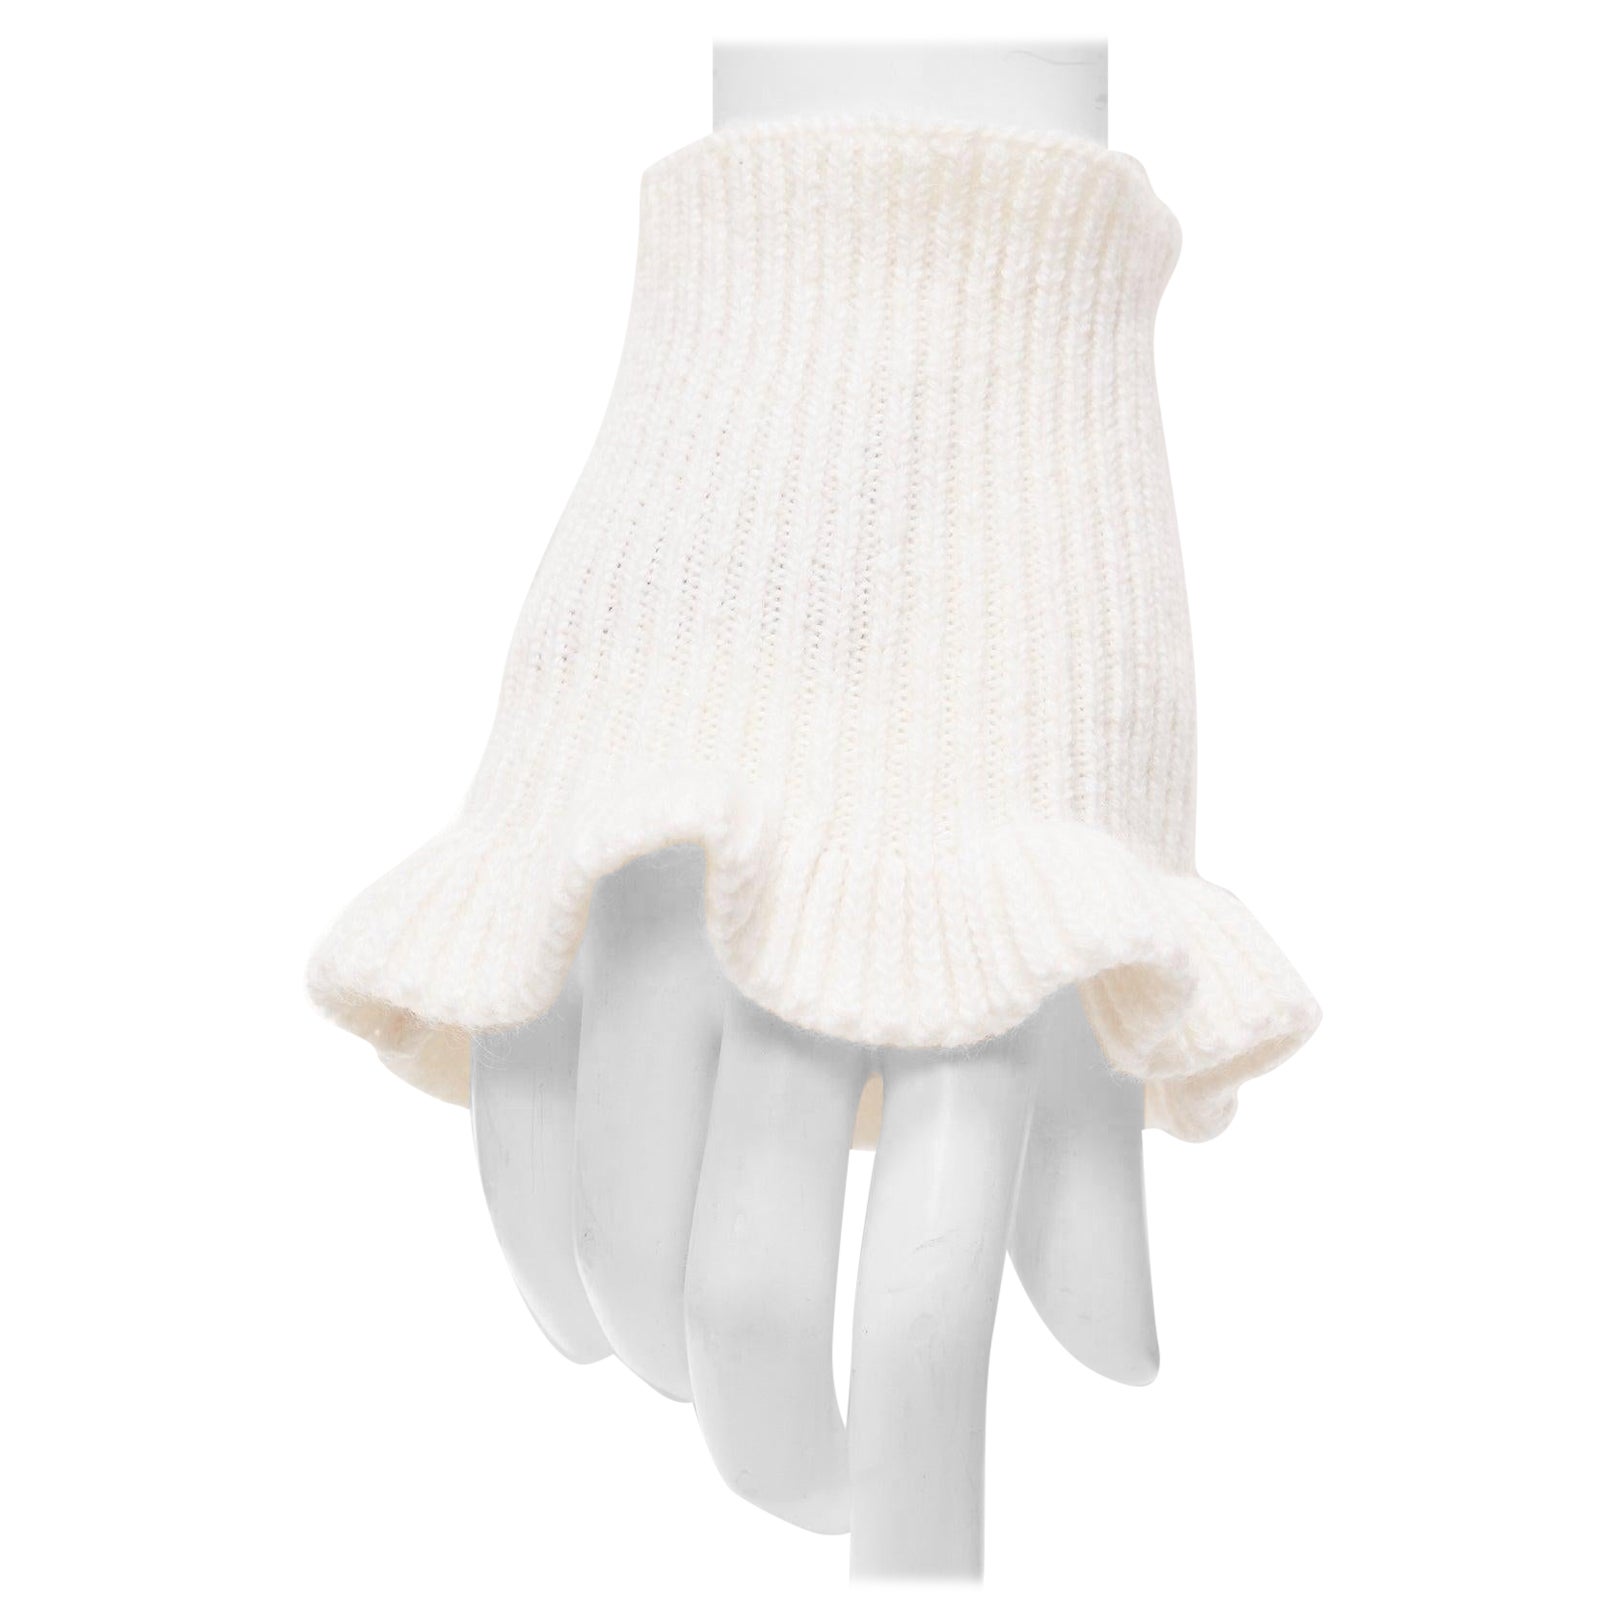 GUCCI white cotton cashmere blend soft frilly cuff half gloves For Sale